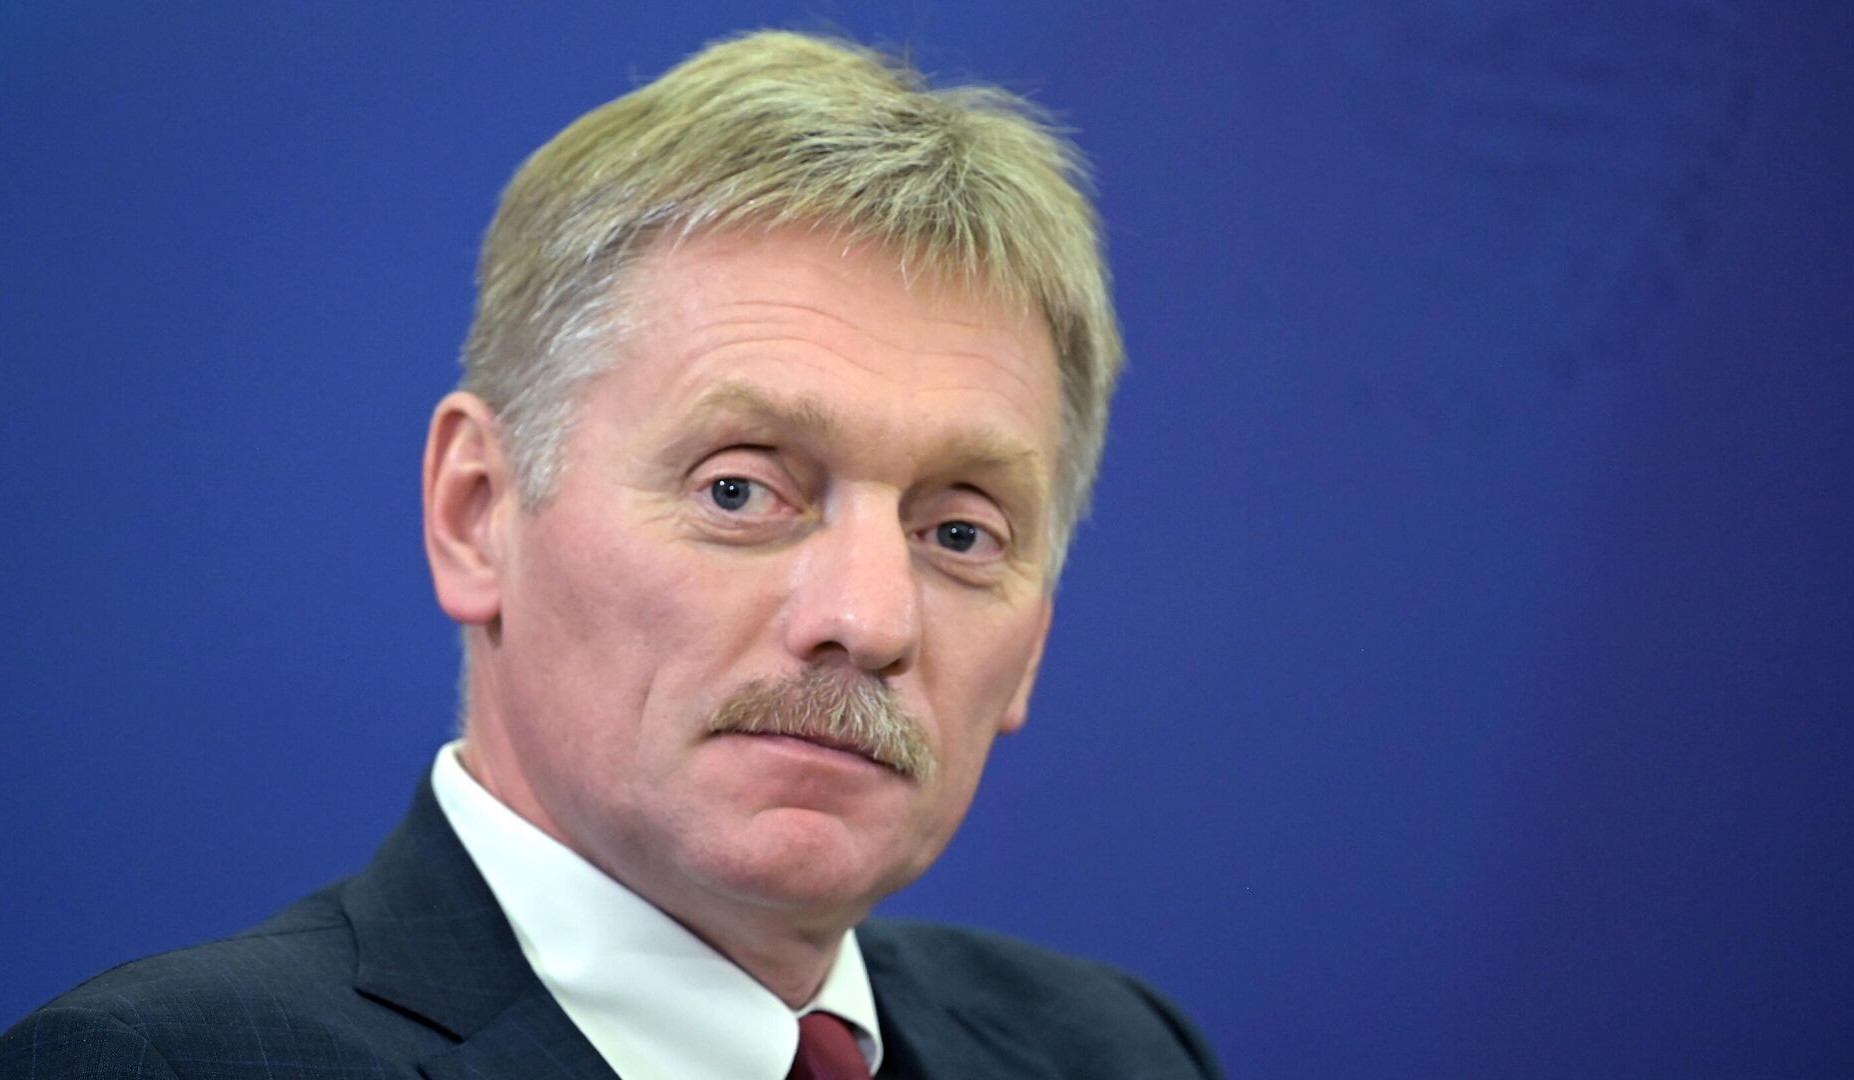 Moscow will not accept price cap on Russian oil: Peskov